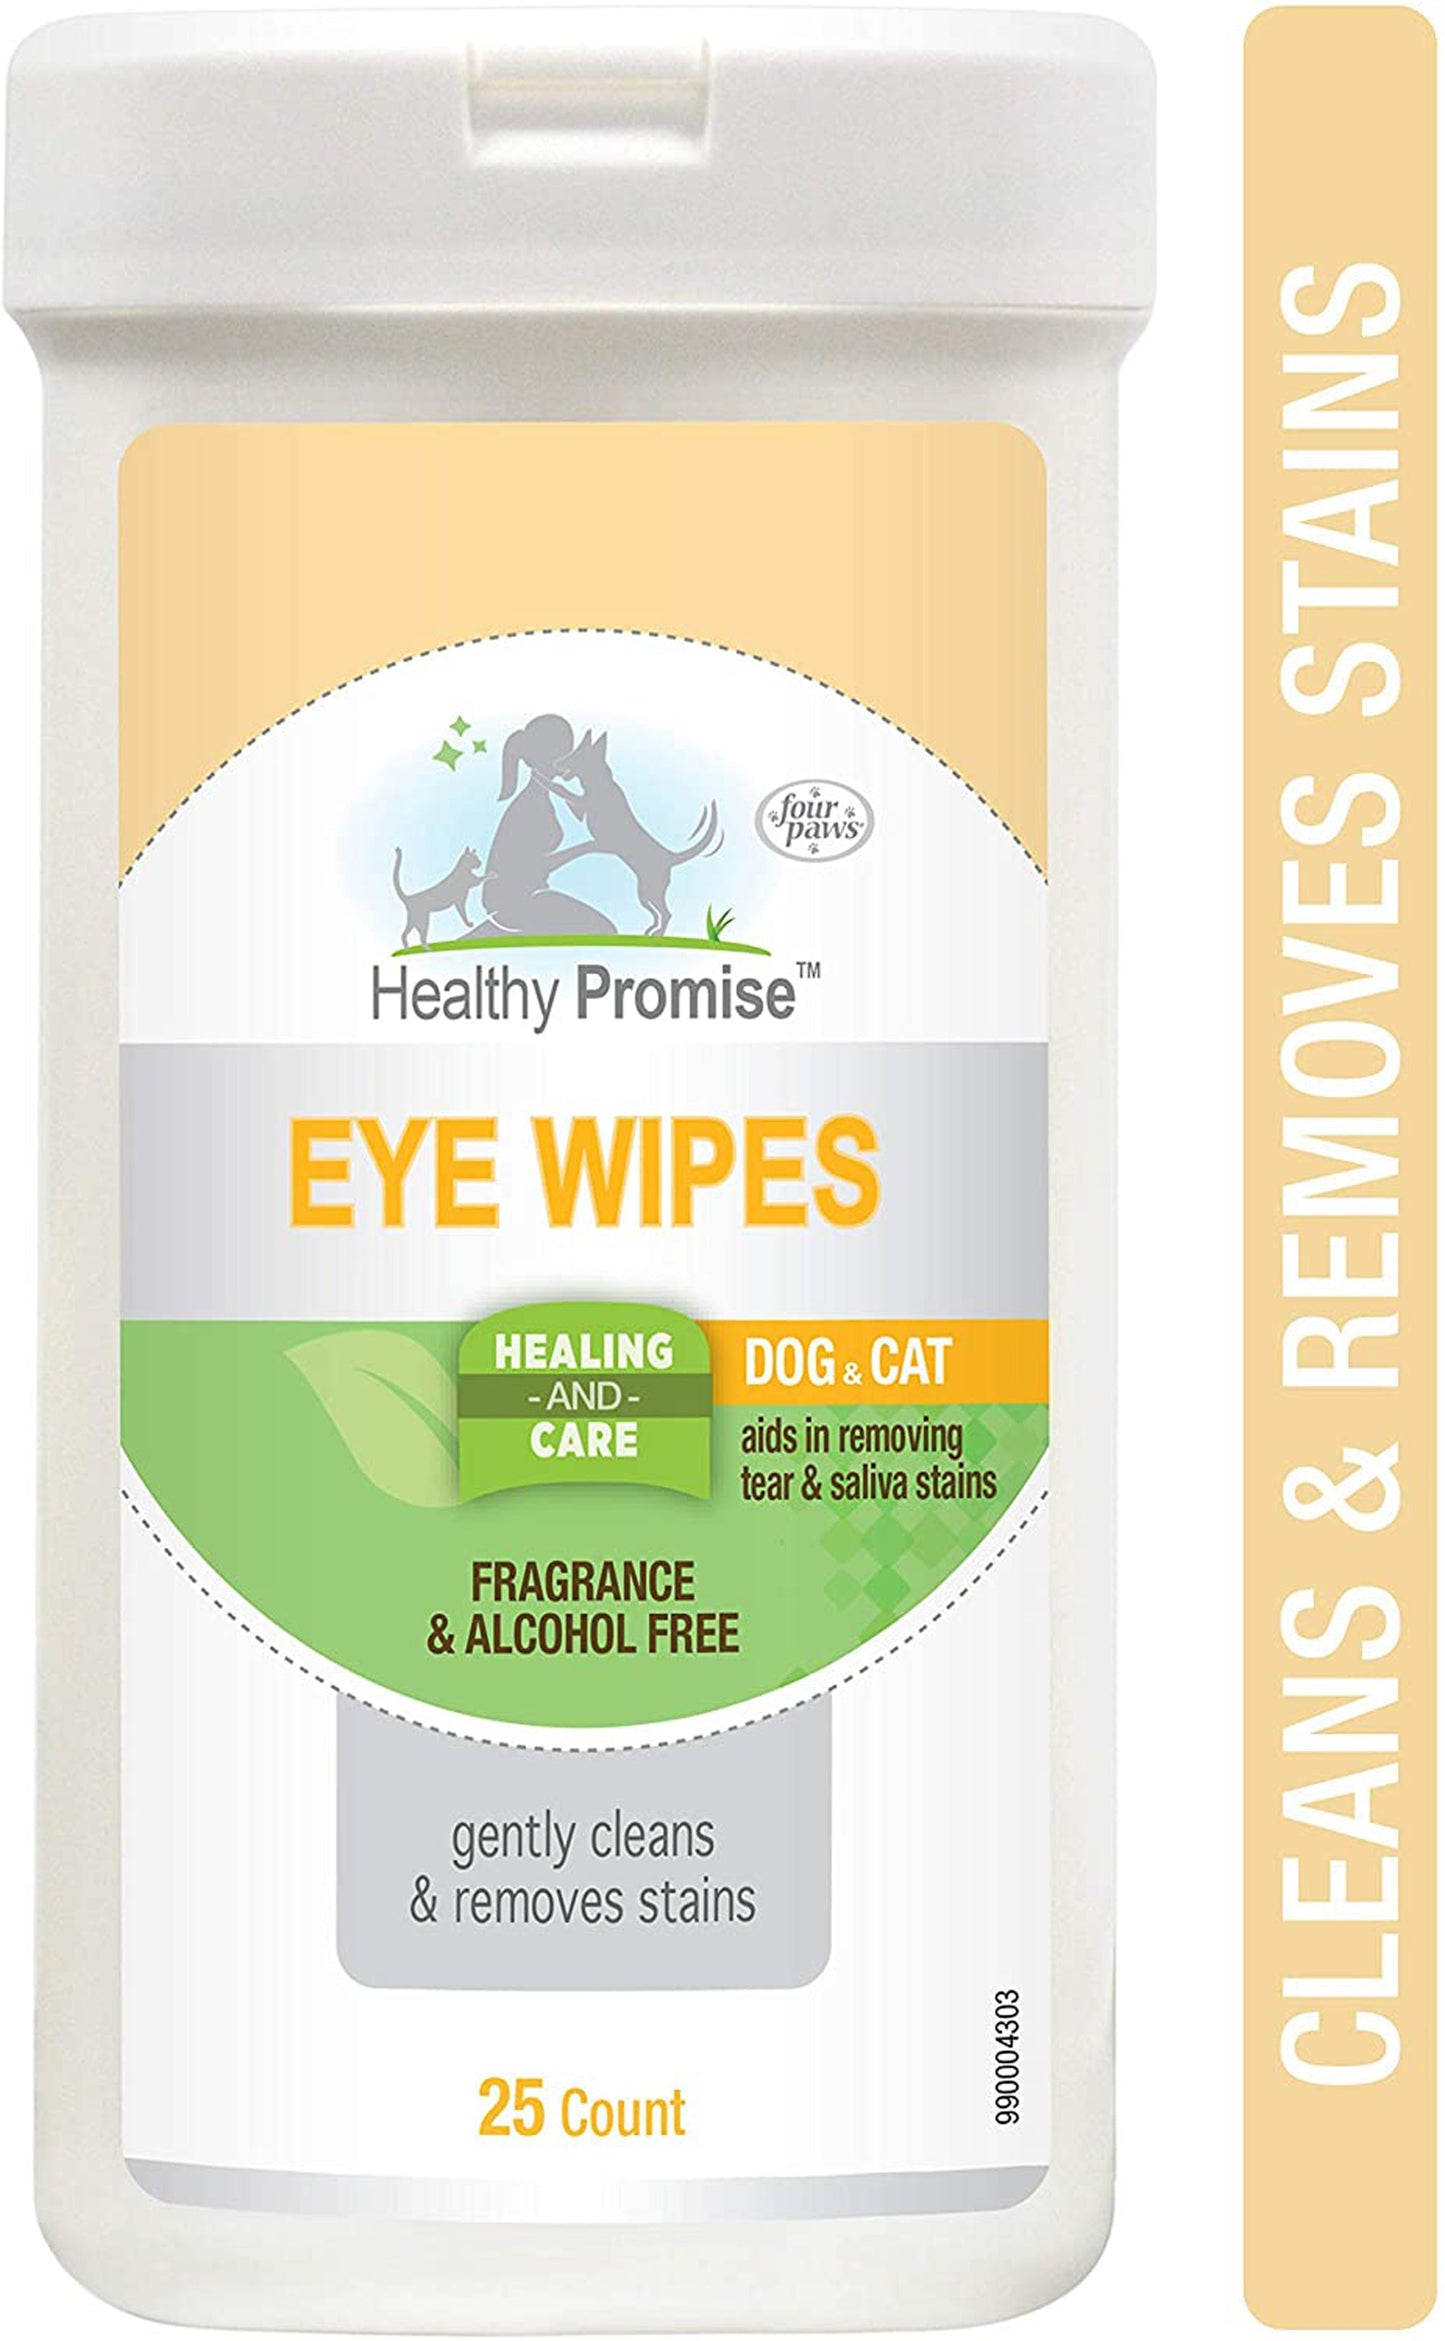 Four Paws Eye Wipes for Dog & Cat Eye Wipes 1ea/25 ct